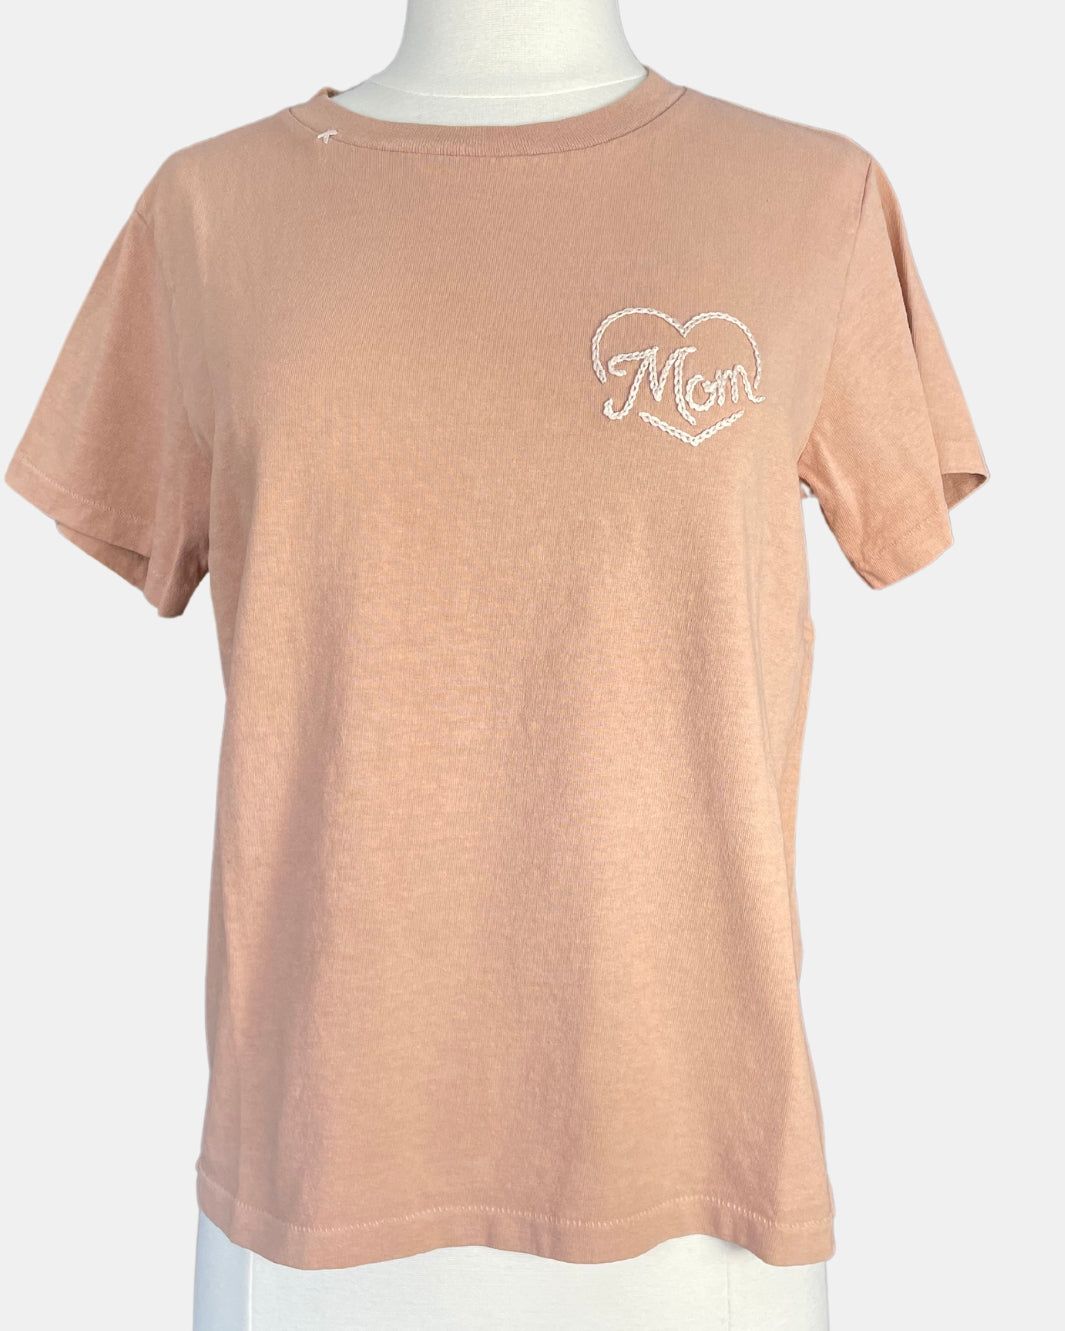 MOM TEE IN BROWN - Romi Boutique